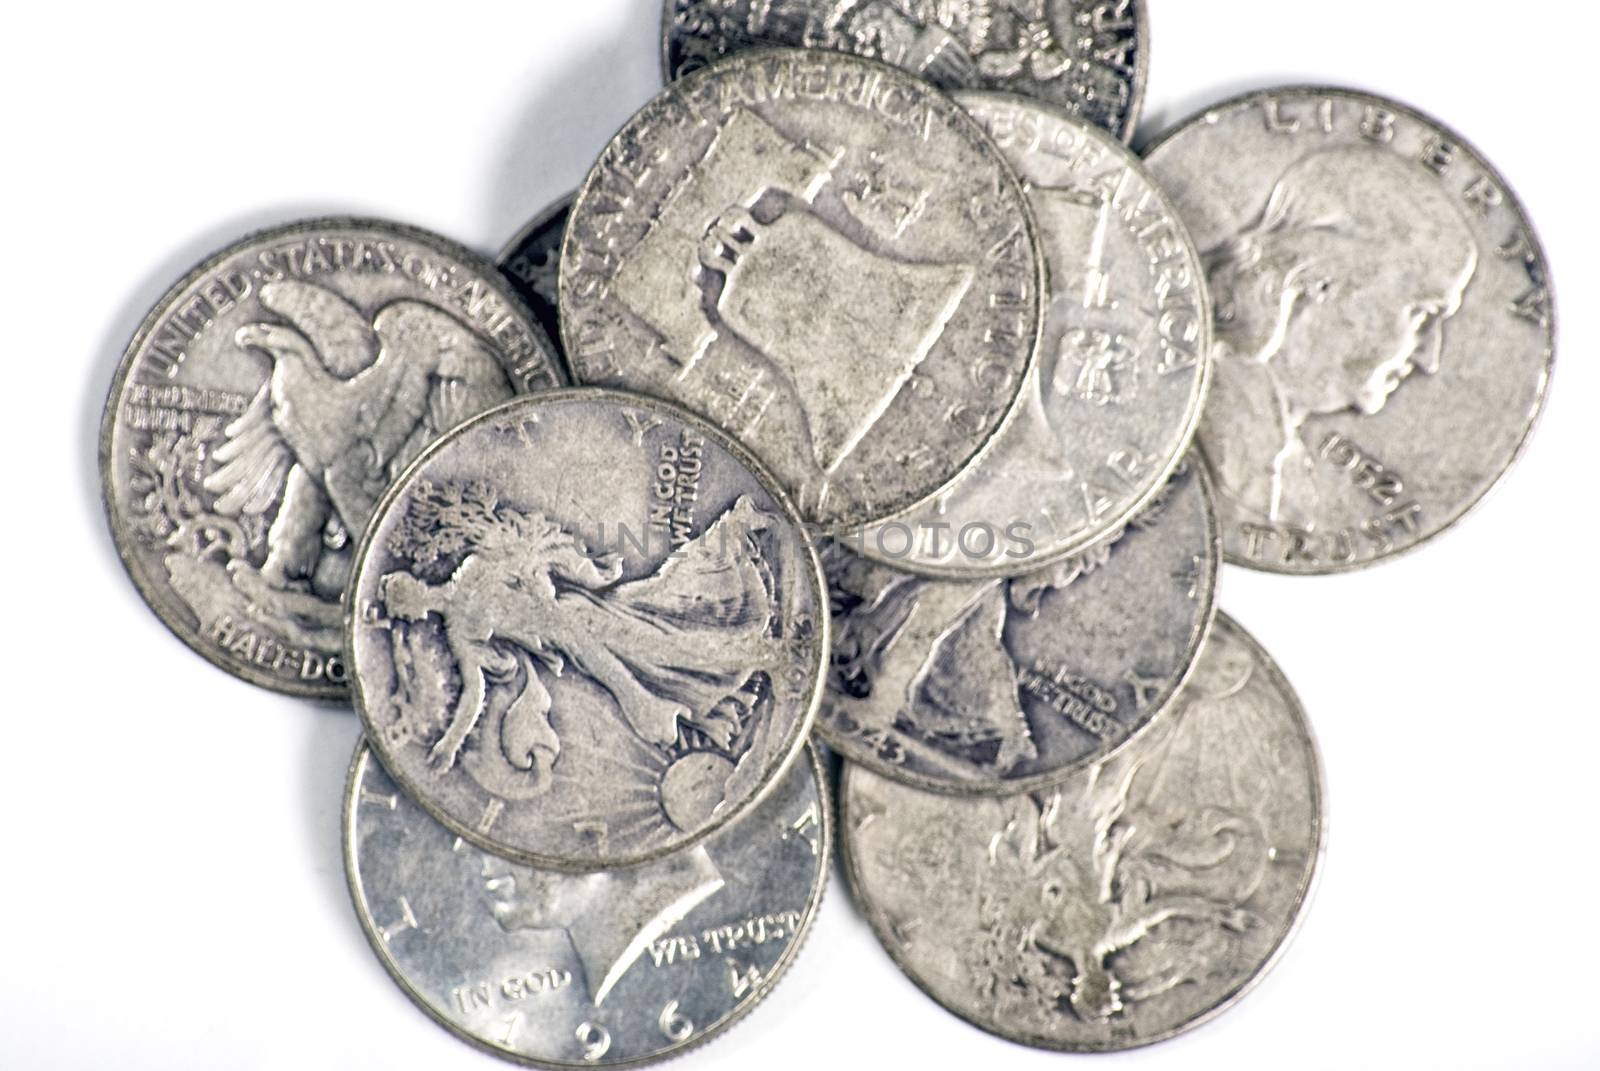 Old silver coins from the USA, half-dollars.